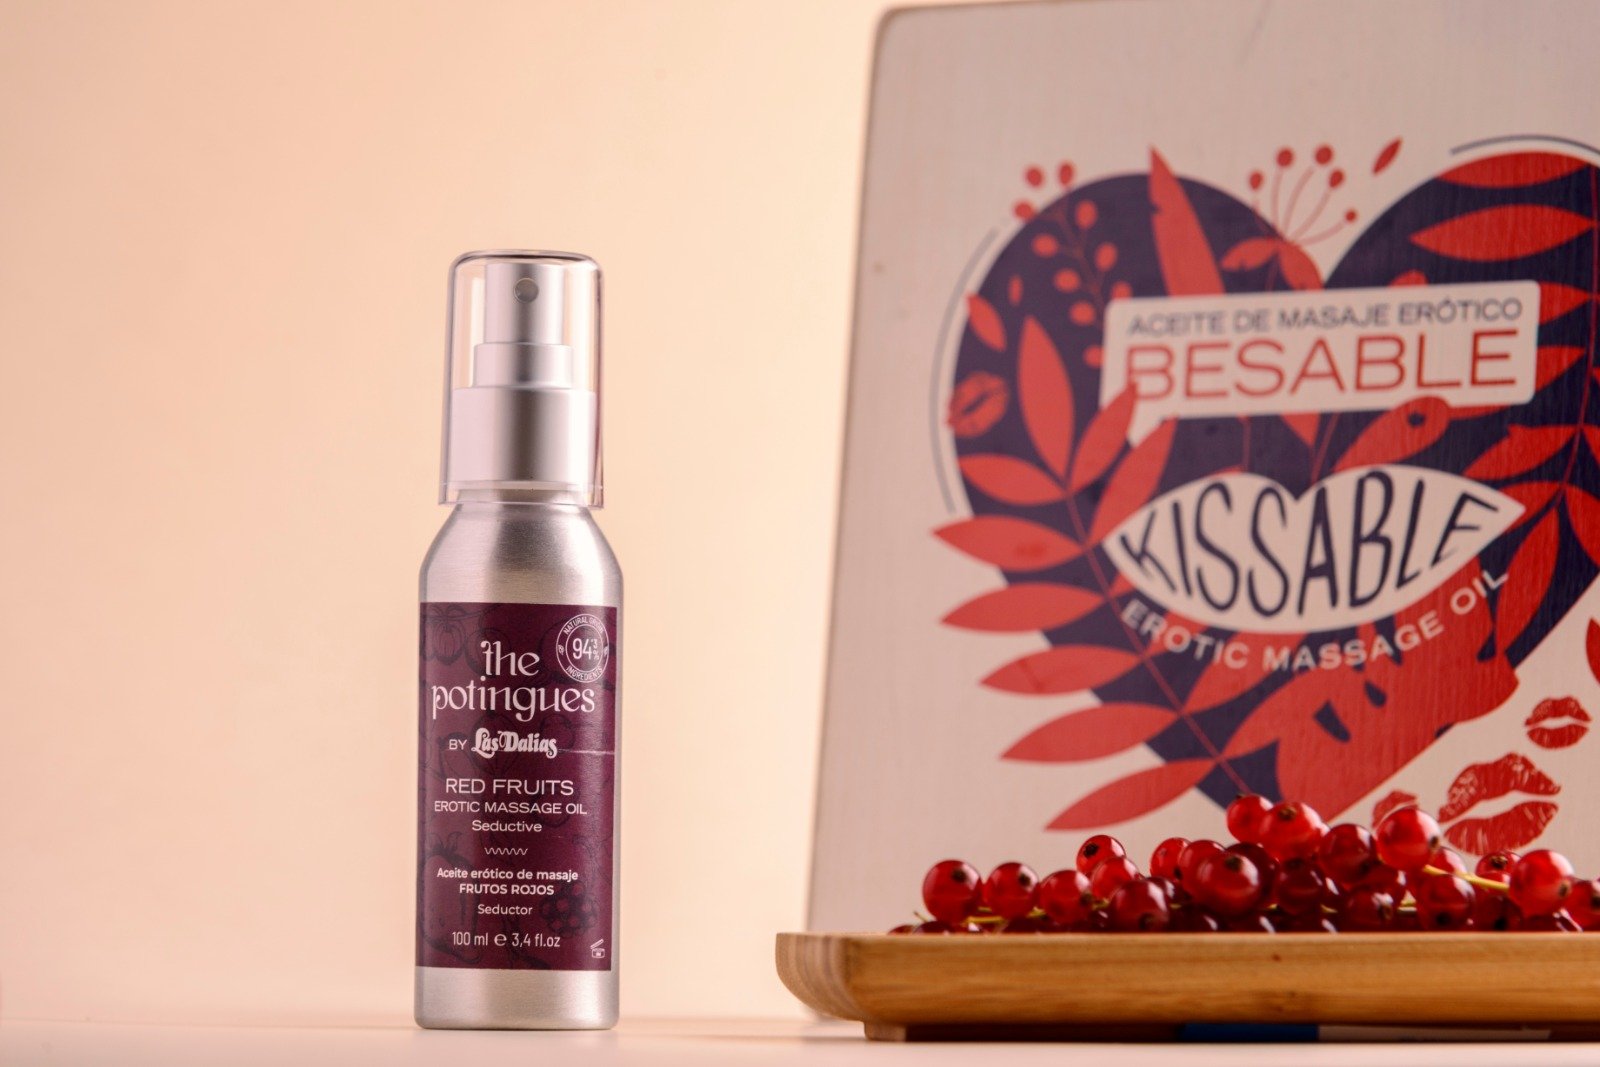 Red Fruits Erotic Massage Oil